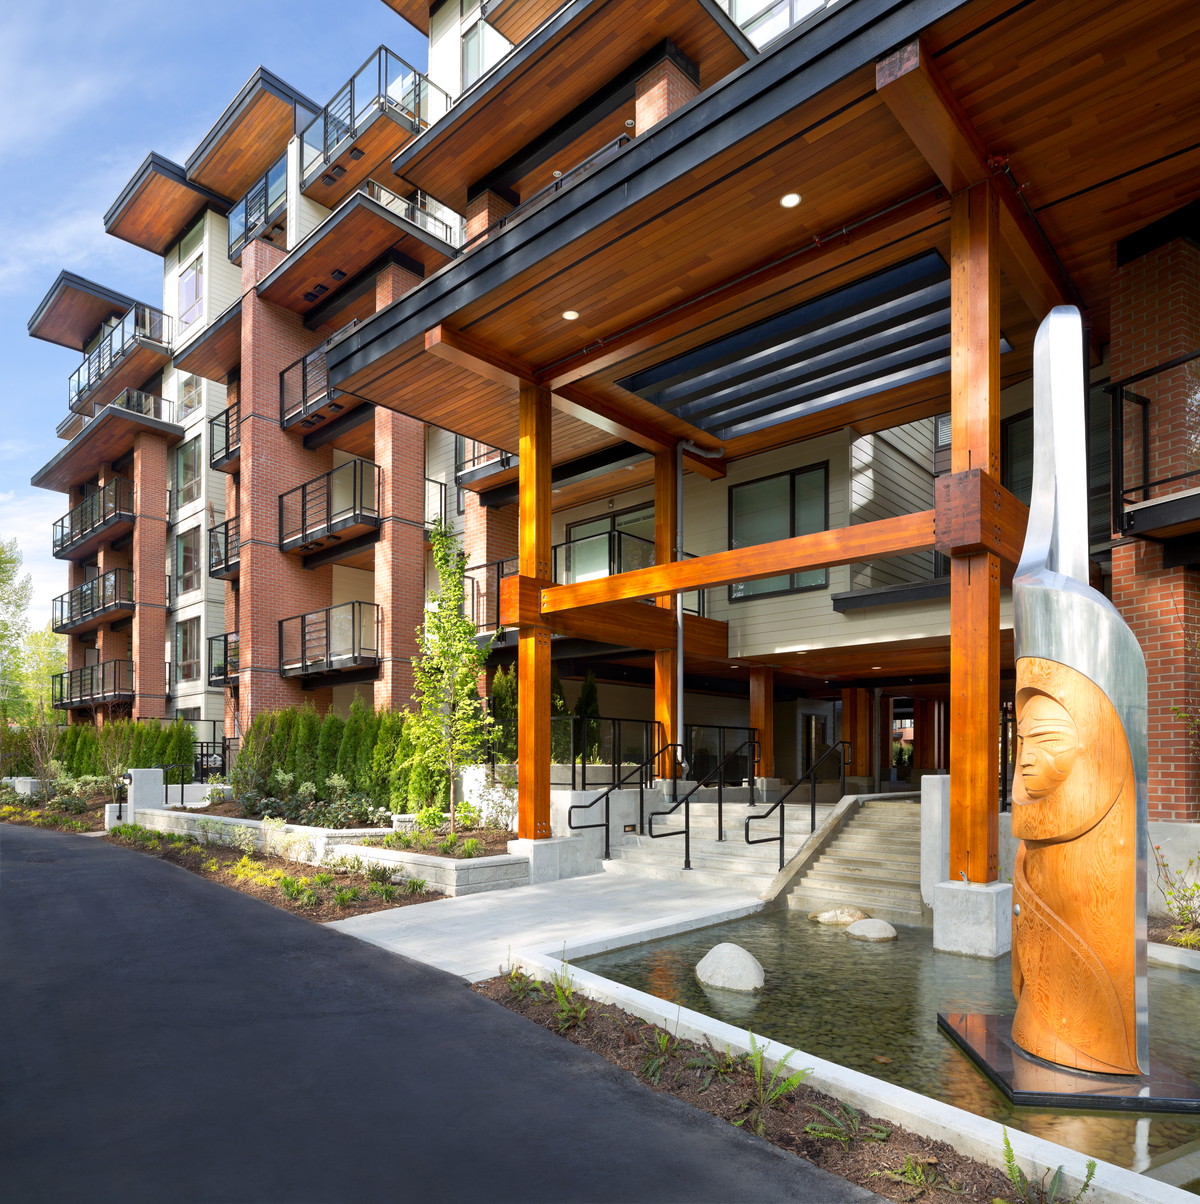 Exterior daytime view of multi-storey post & beam main entrance of 'The Shore', a multi-building residential development with many large wooden decks and balconies